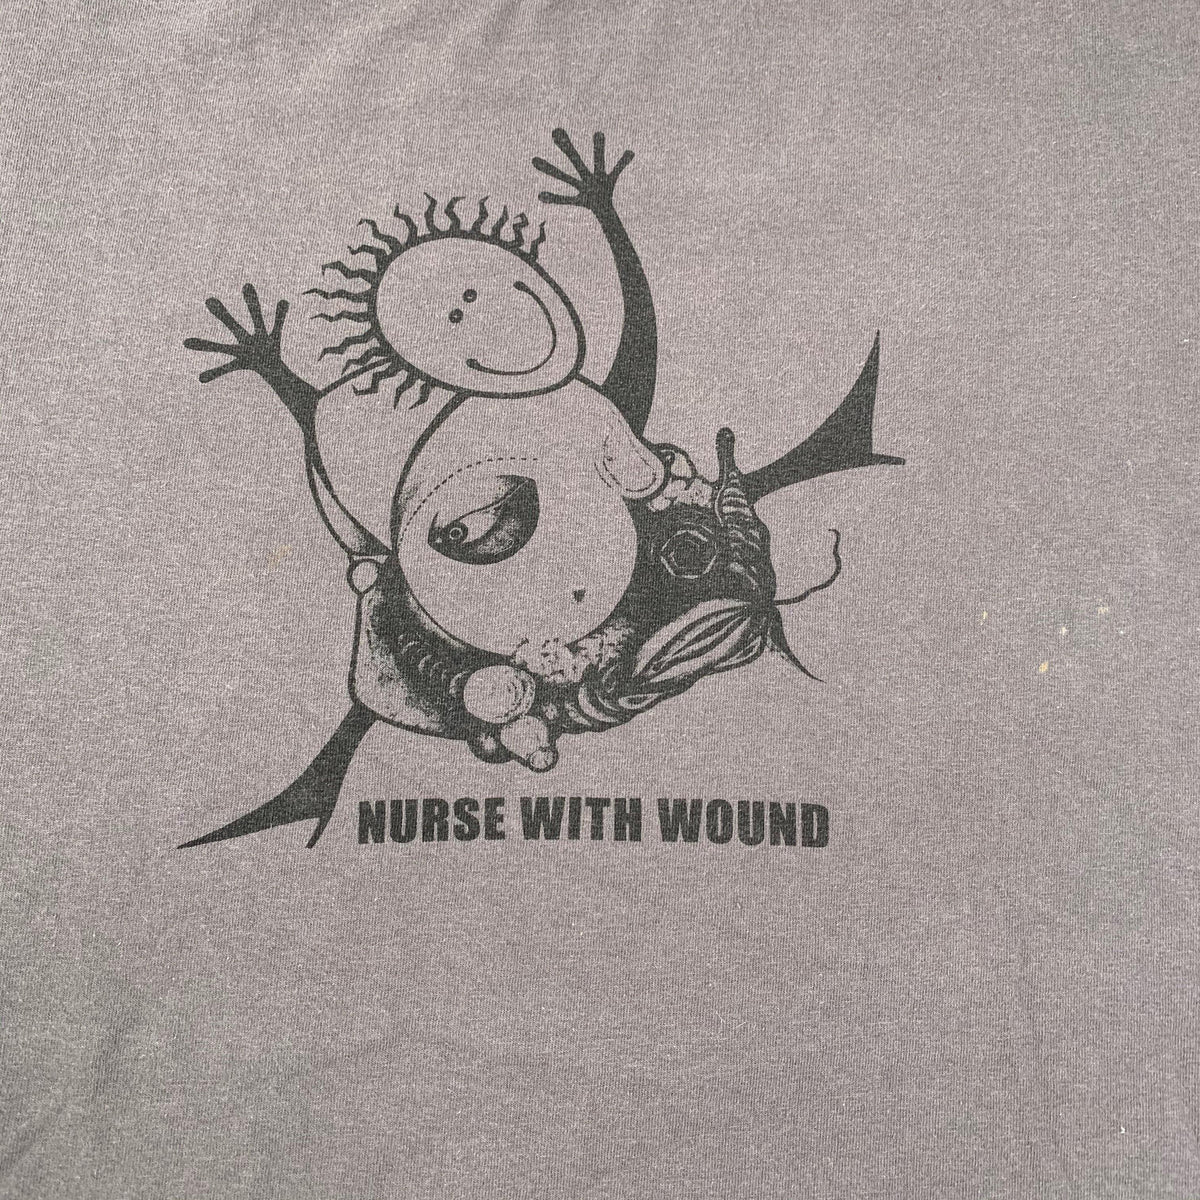 Vintage Nurse With Wound &quot;Sugar Fish Drink&quot; T-Shirt - jointcustodydc